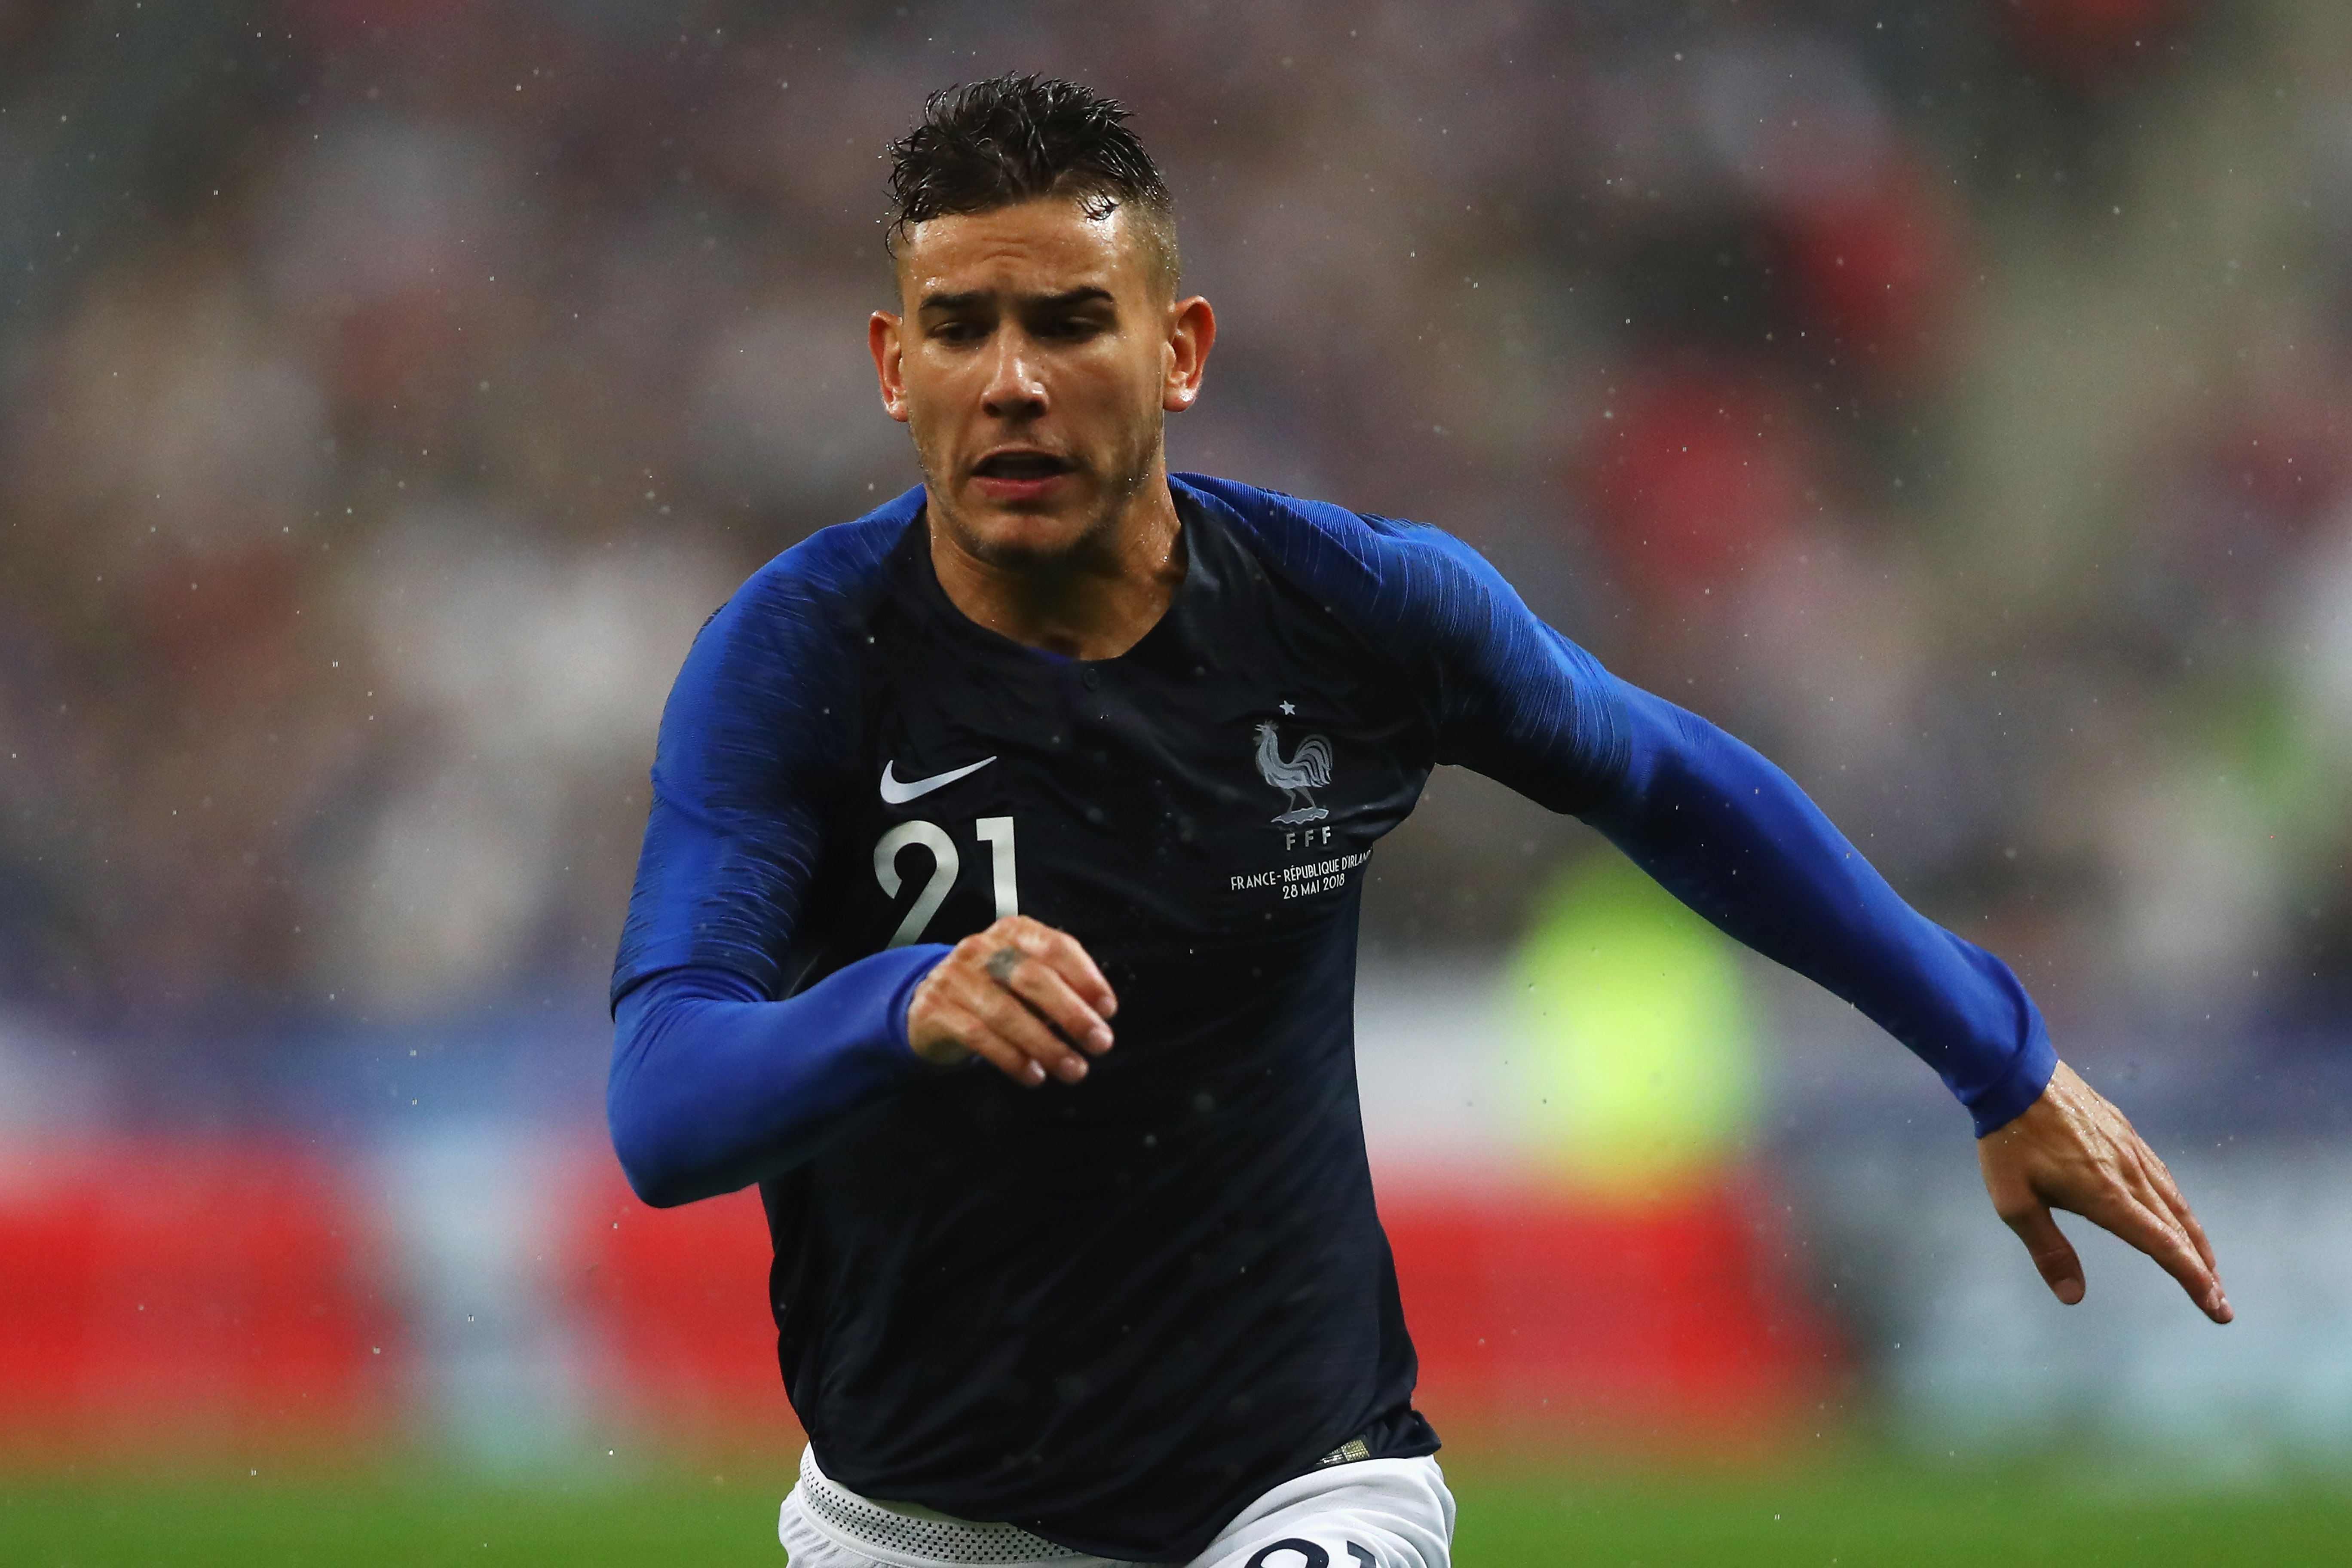 PARIS, FRANCE - MAY 28:  Lucas Hernandez of France in action during the International Friendly match between France and Ireland at Stade de France on May 28, 2018 in Paris, France.  (Photo by Dean Mouhtaropoulos/Getty Images)